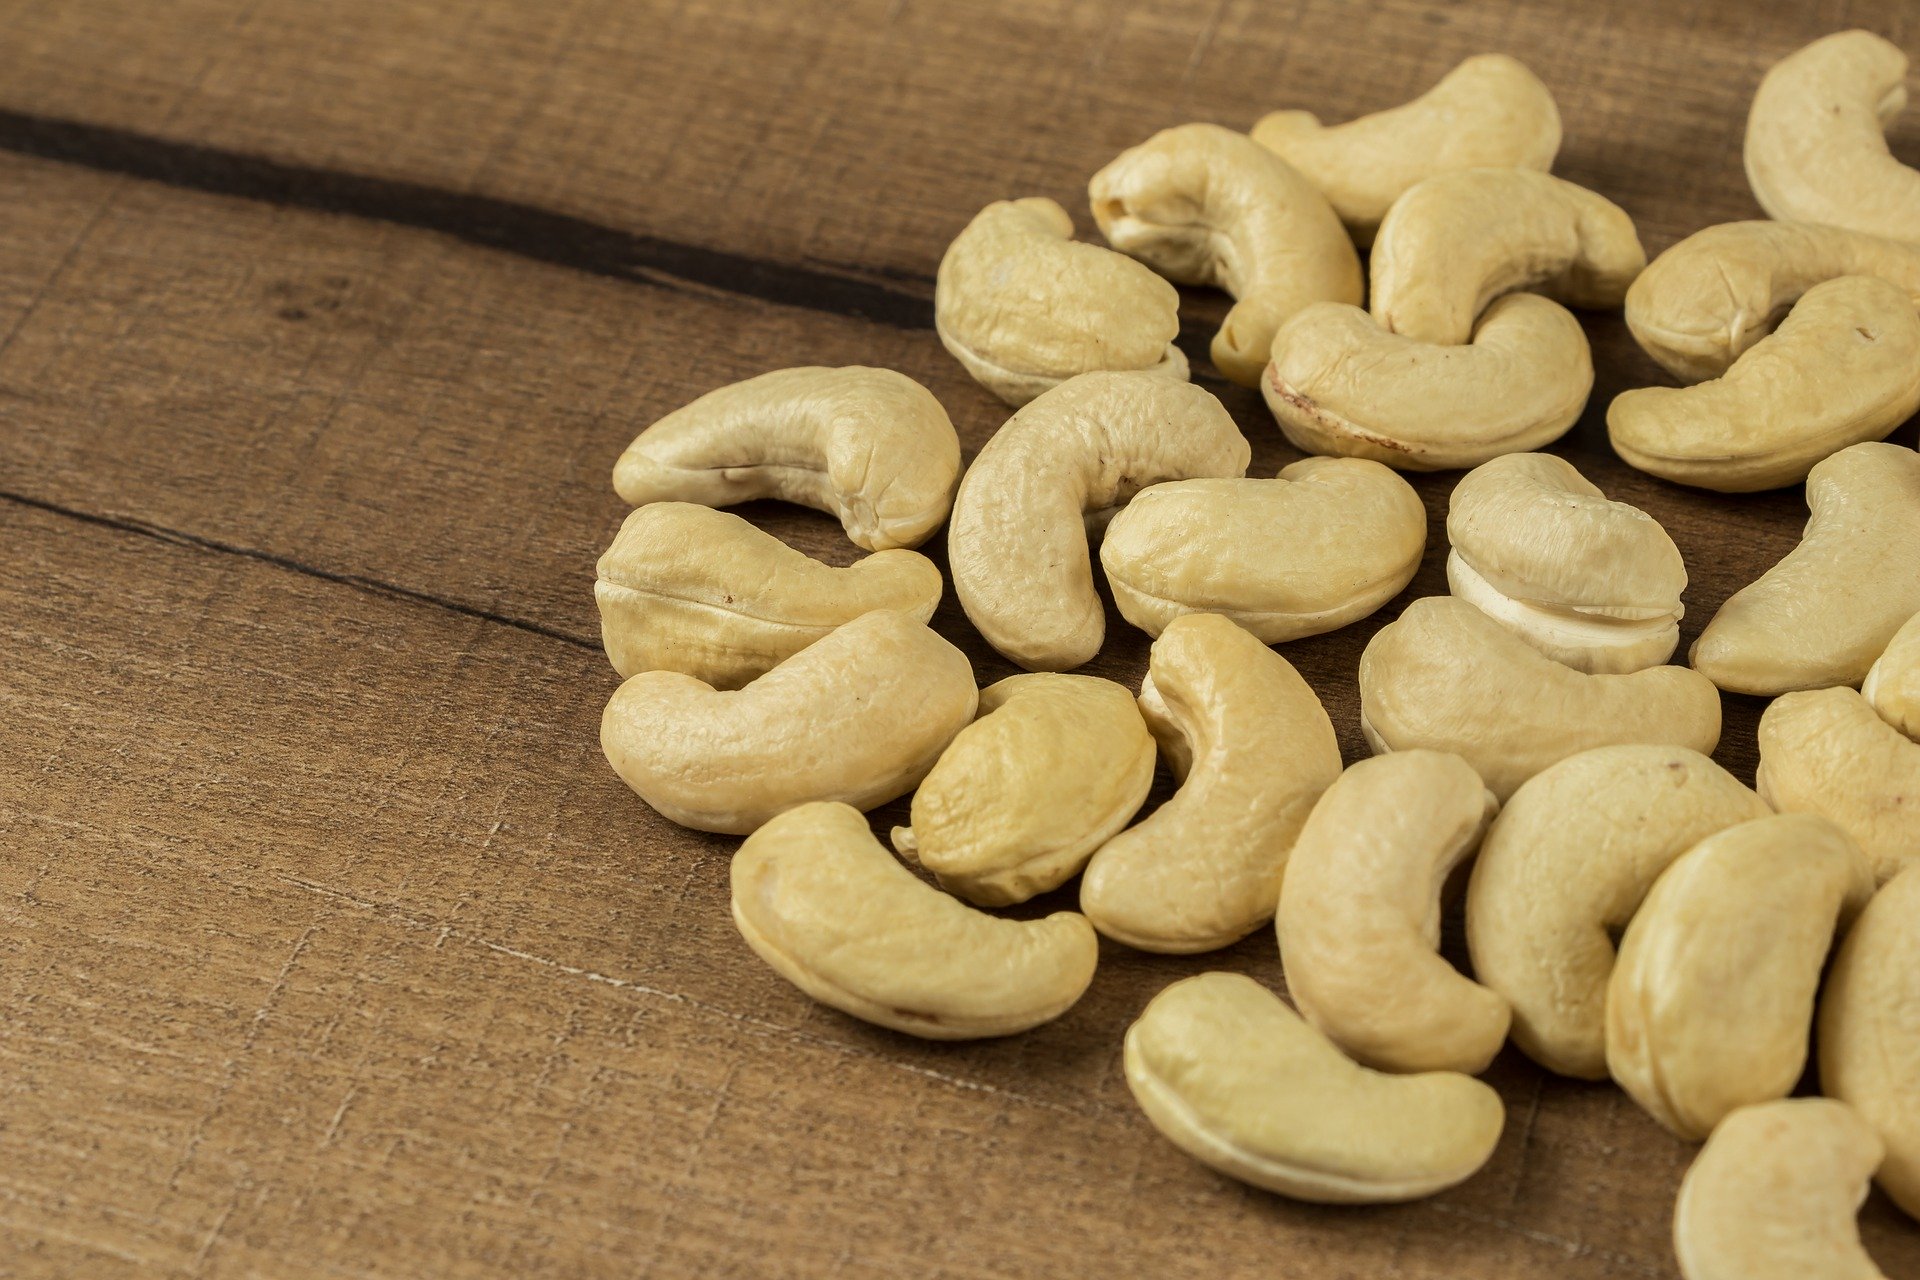 COVID-19 Impact on Organic Cashew Nuts Market – Global Industry Analysis and Forecast 2027